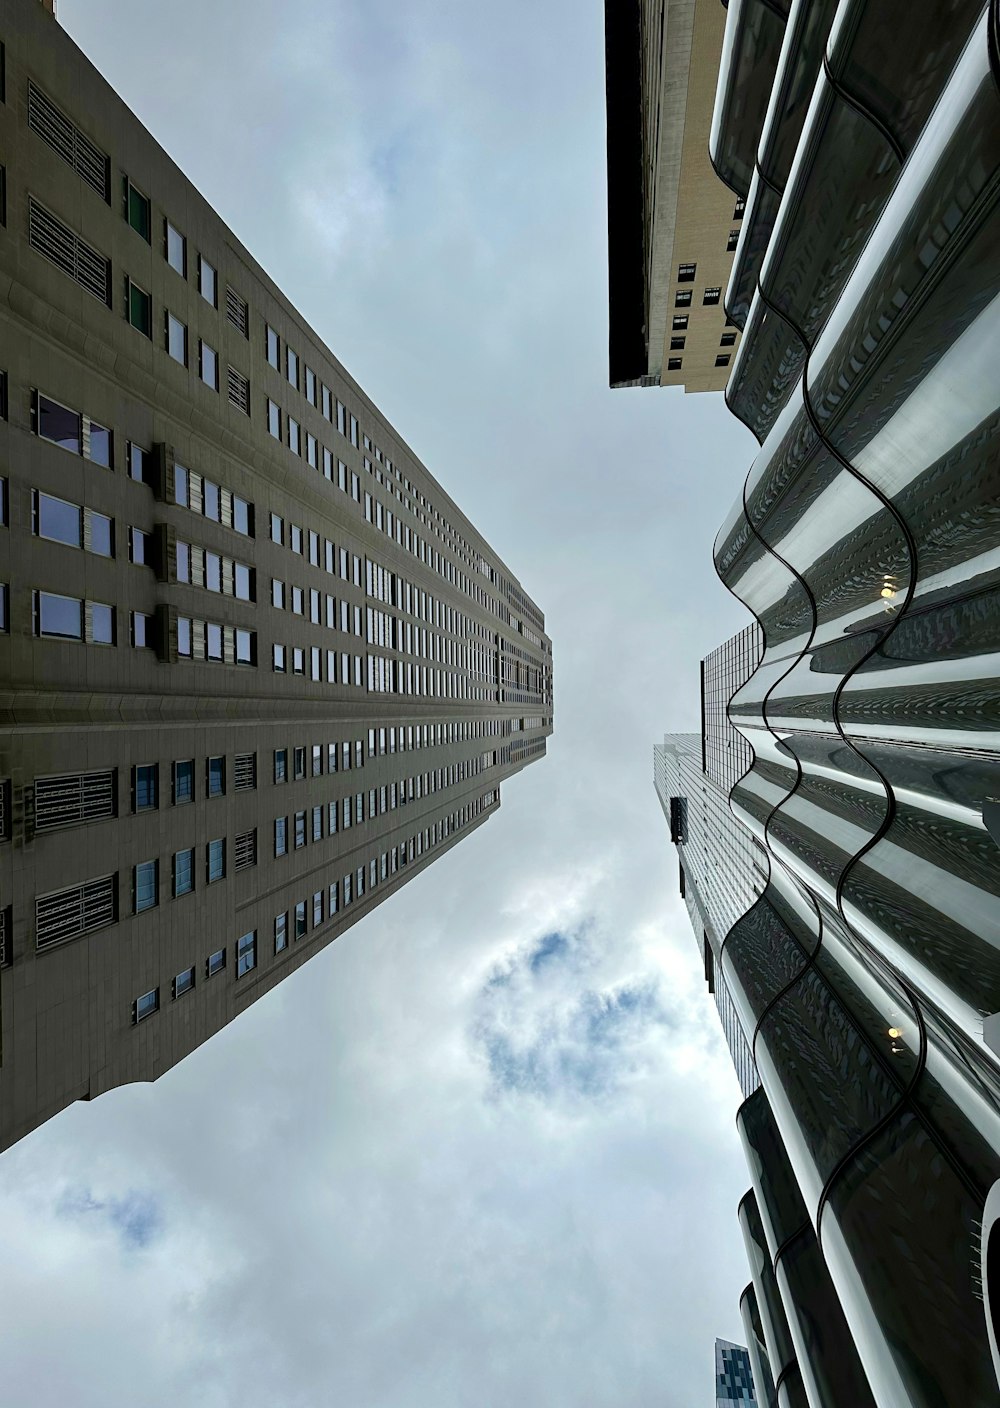 looking up at two tall buildings in a city